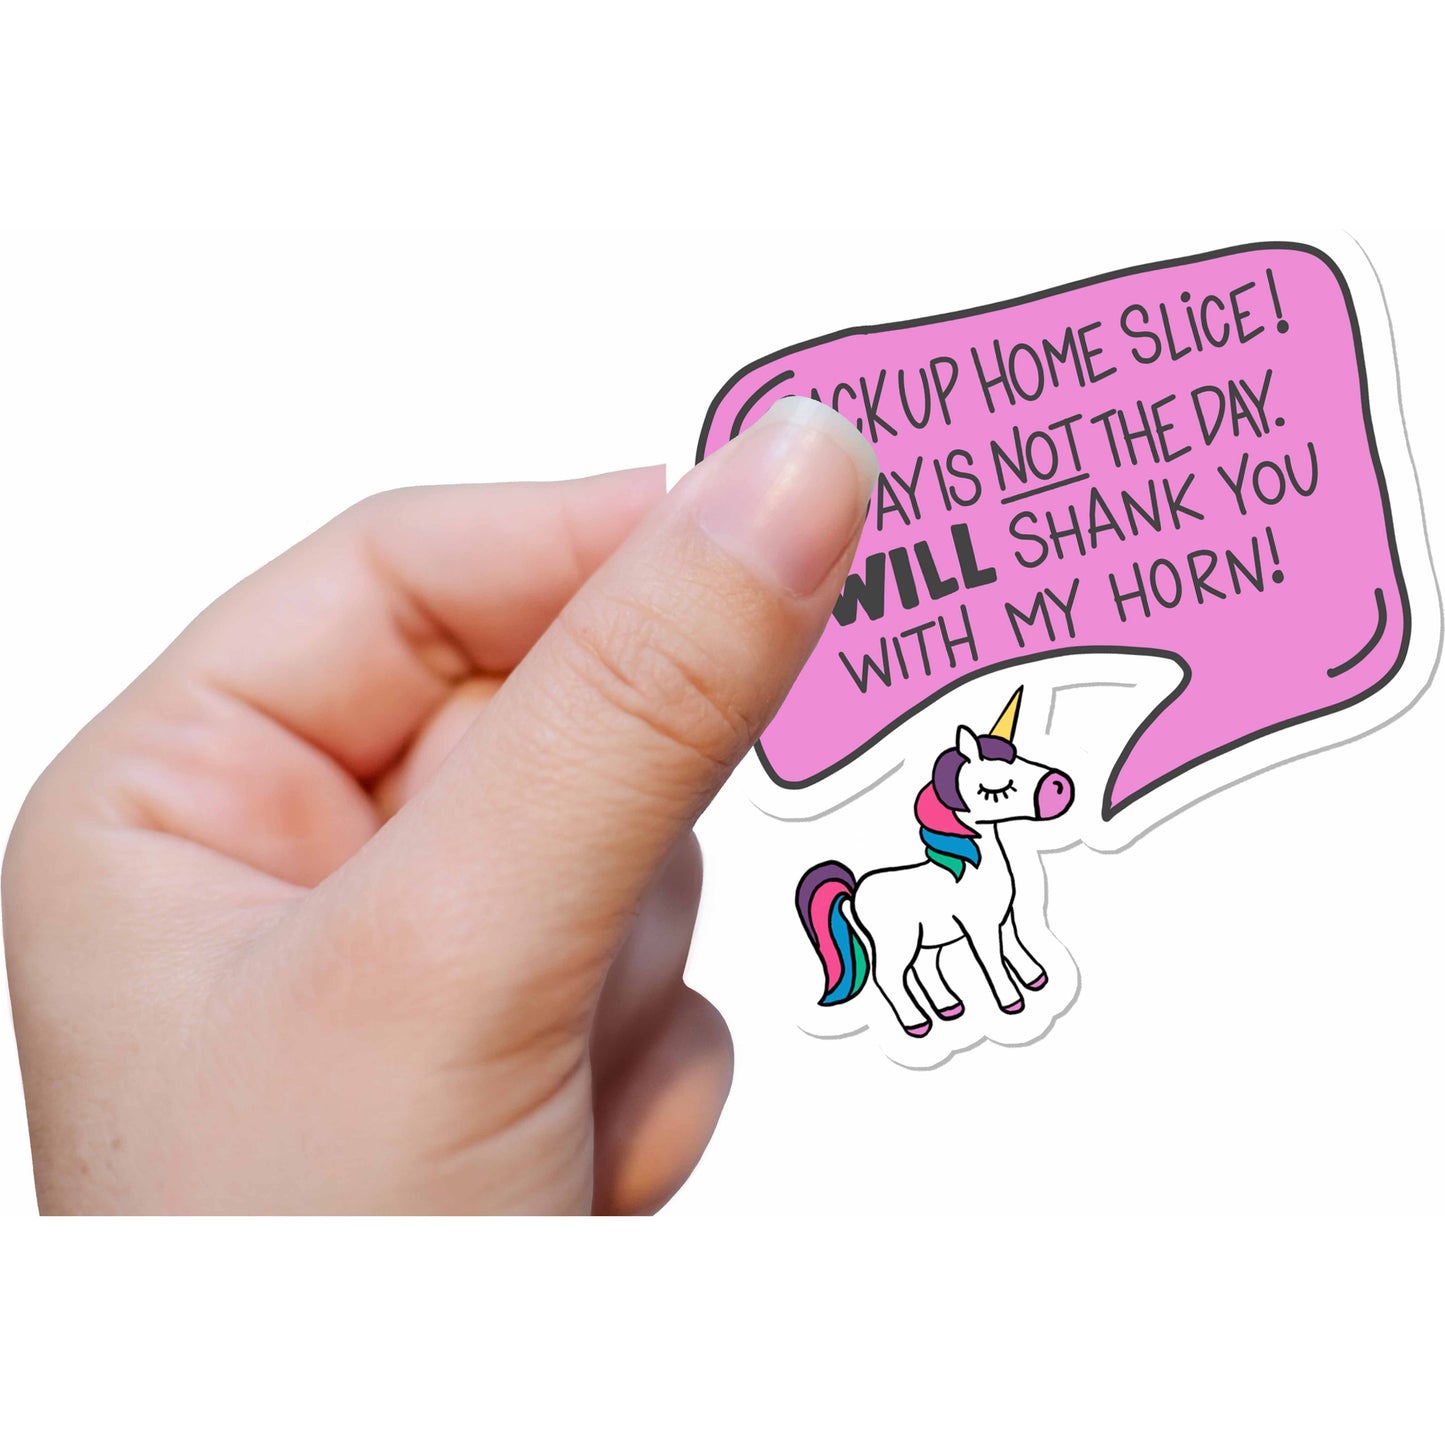 Today Is Not the Day (I will shank you with my horn) Unicorn Vinyl Sticker